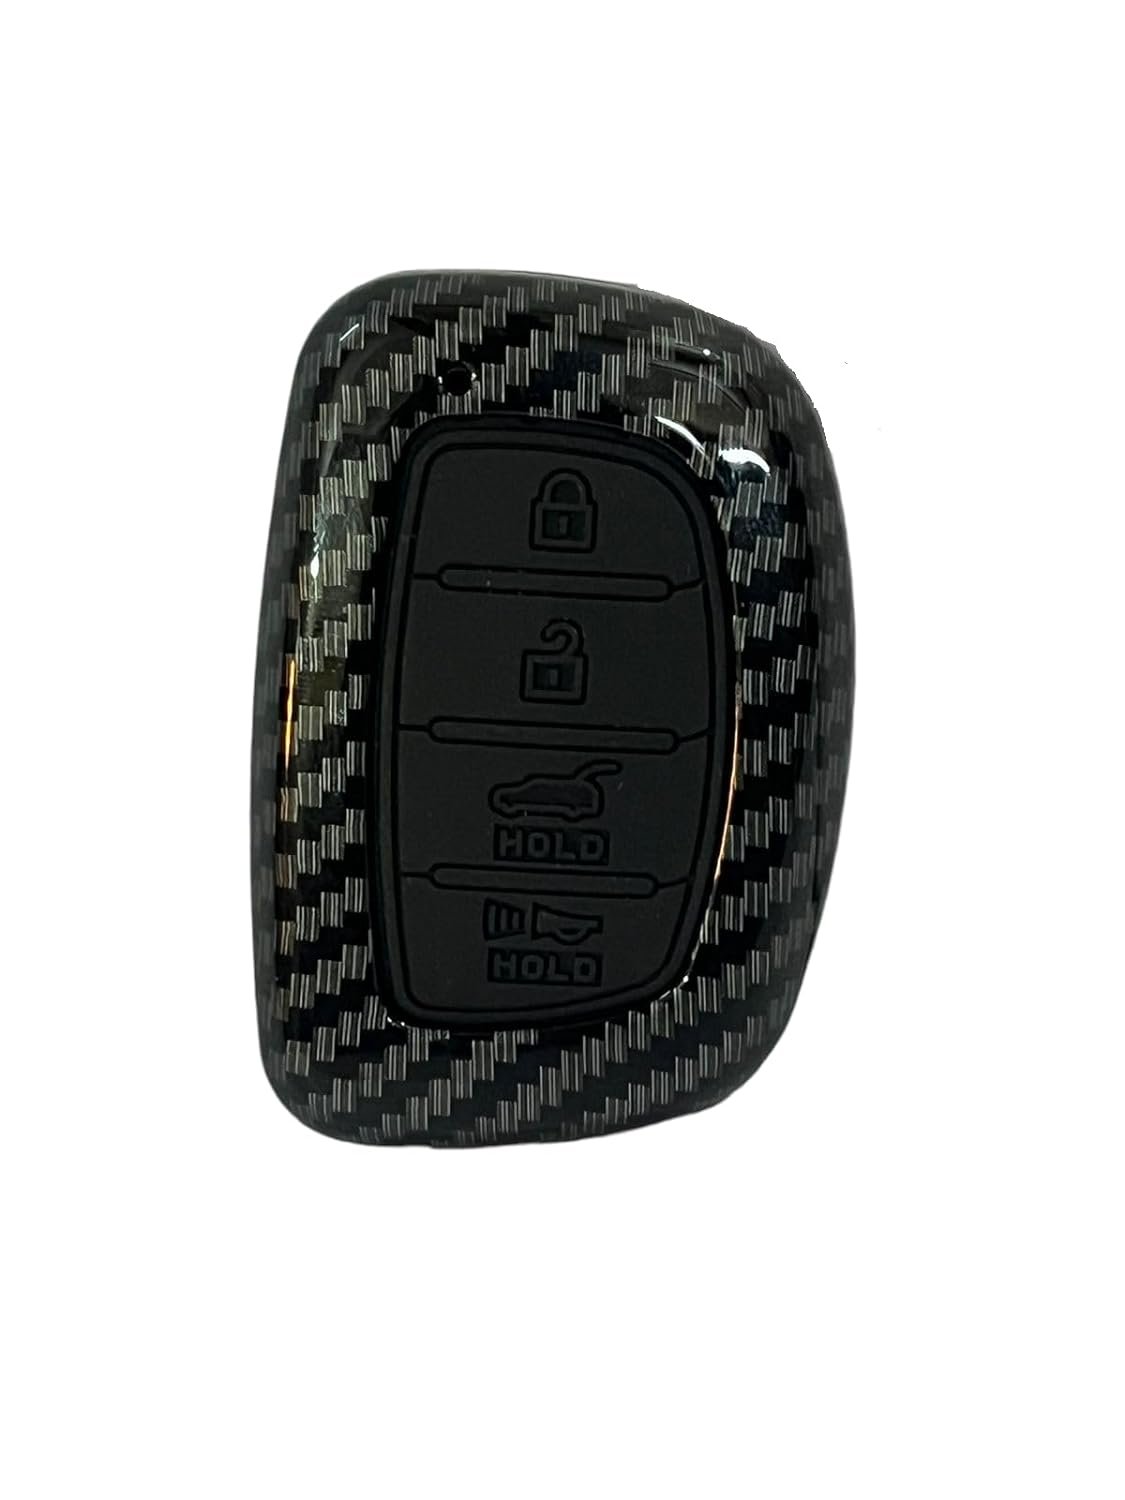 Carbon Fiber ABS Car Key Cover Compatible with Venue, Elantra, Tucson, i20 N Line 2021, Creta 2020, i20 2020 Model with 4 Button Smart Key (Key Chain Included) Image 